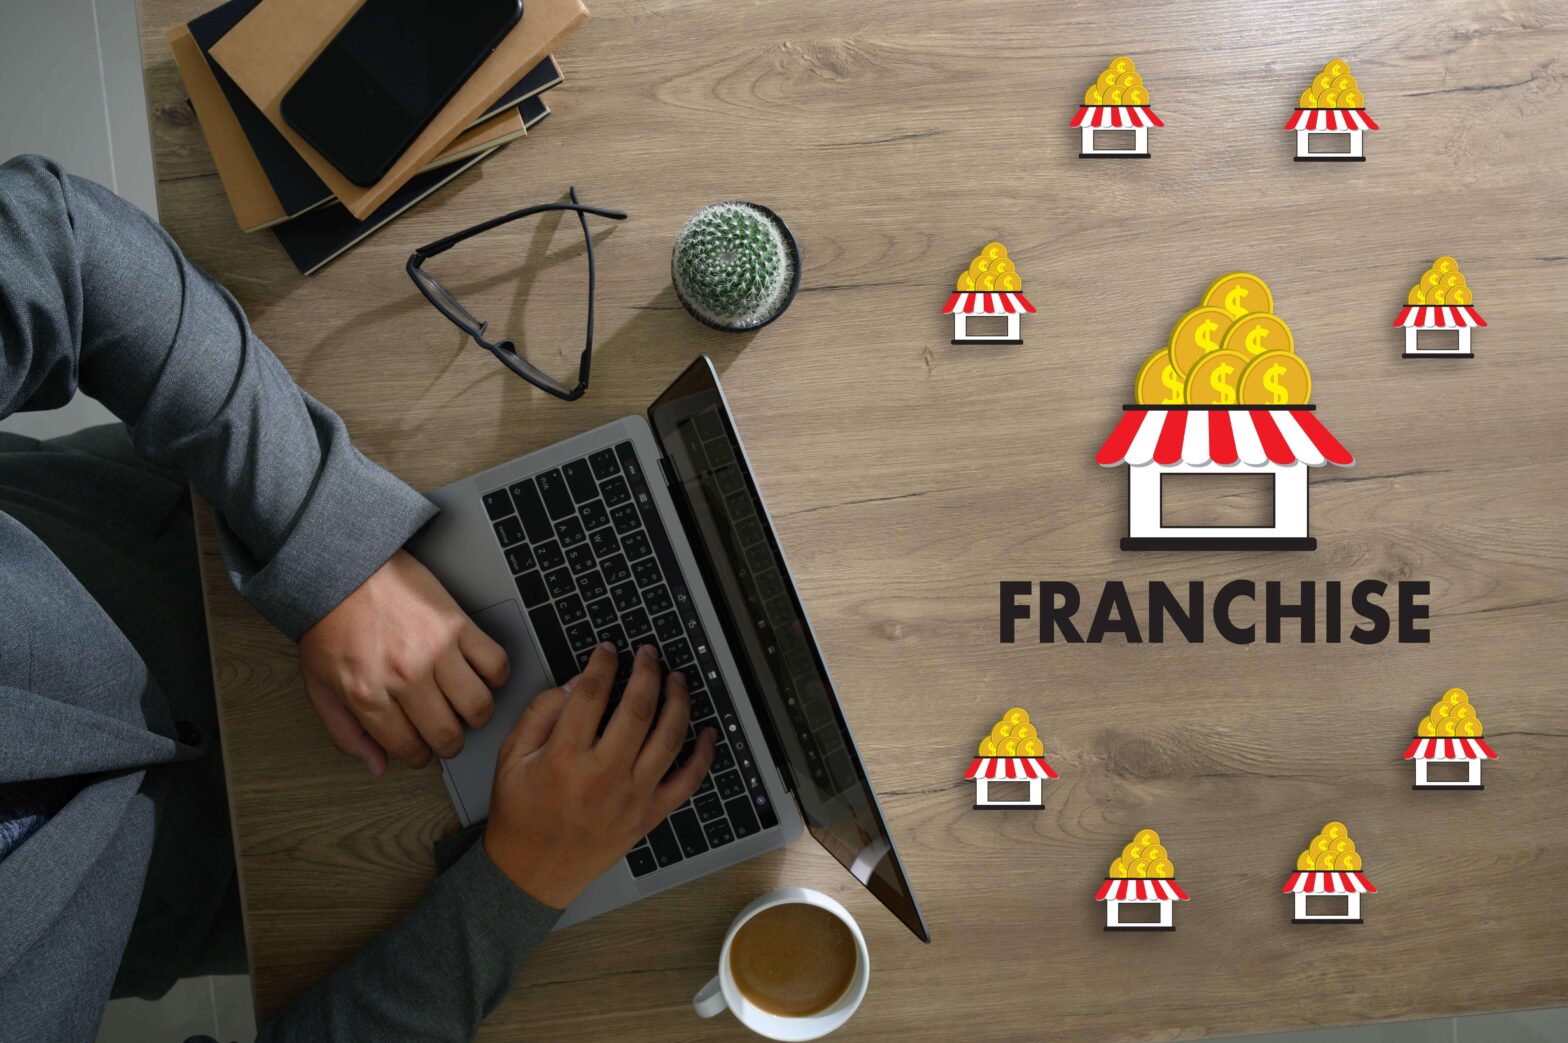 How Franchise Owners Can Catch More Mobile Users Online